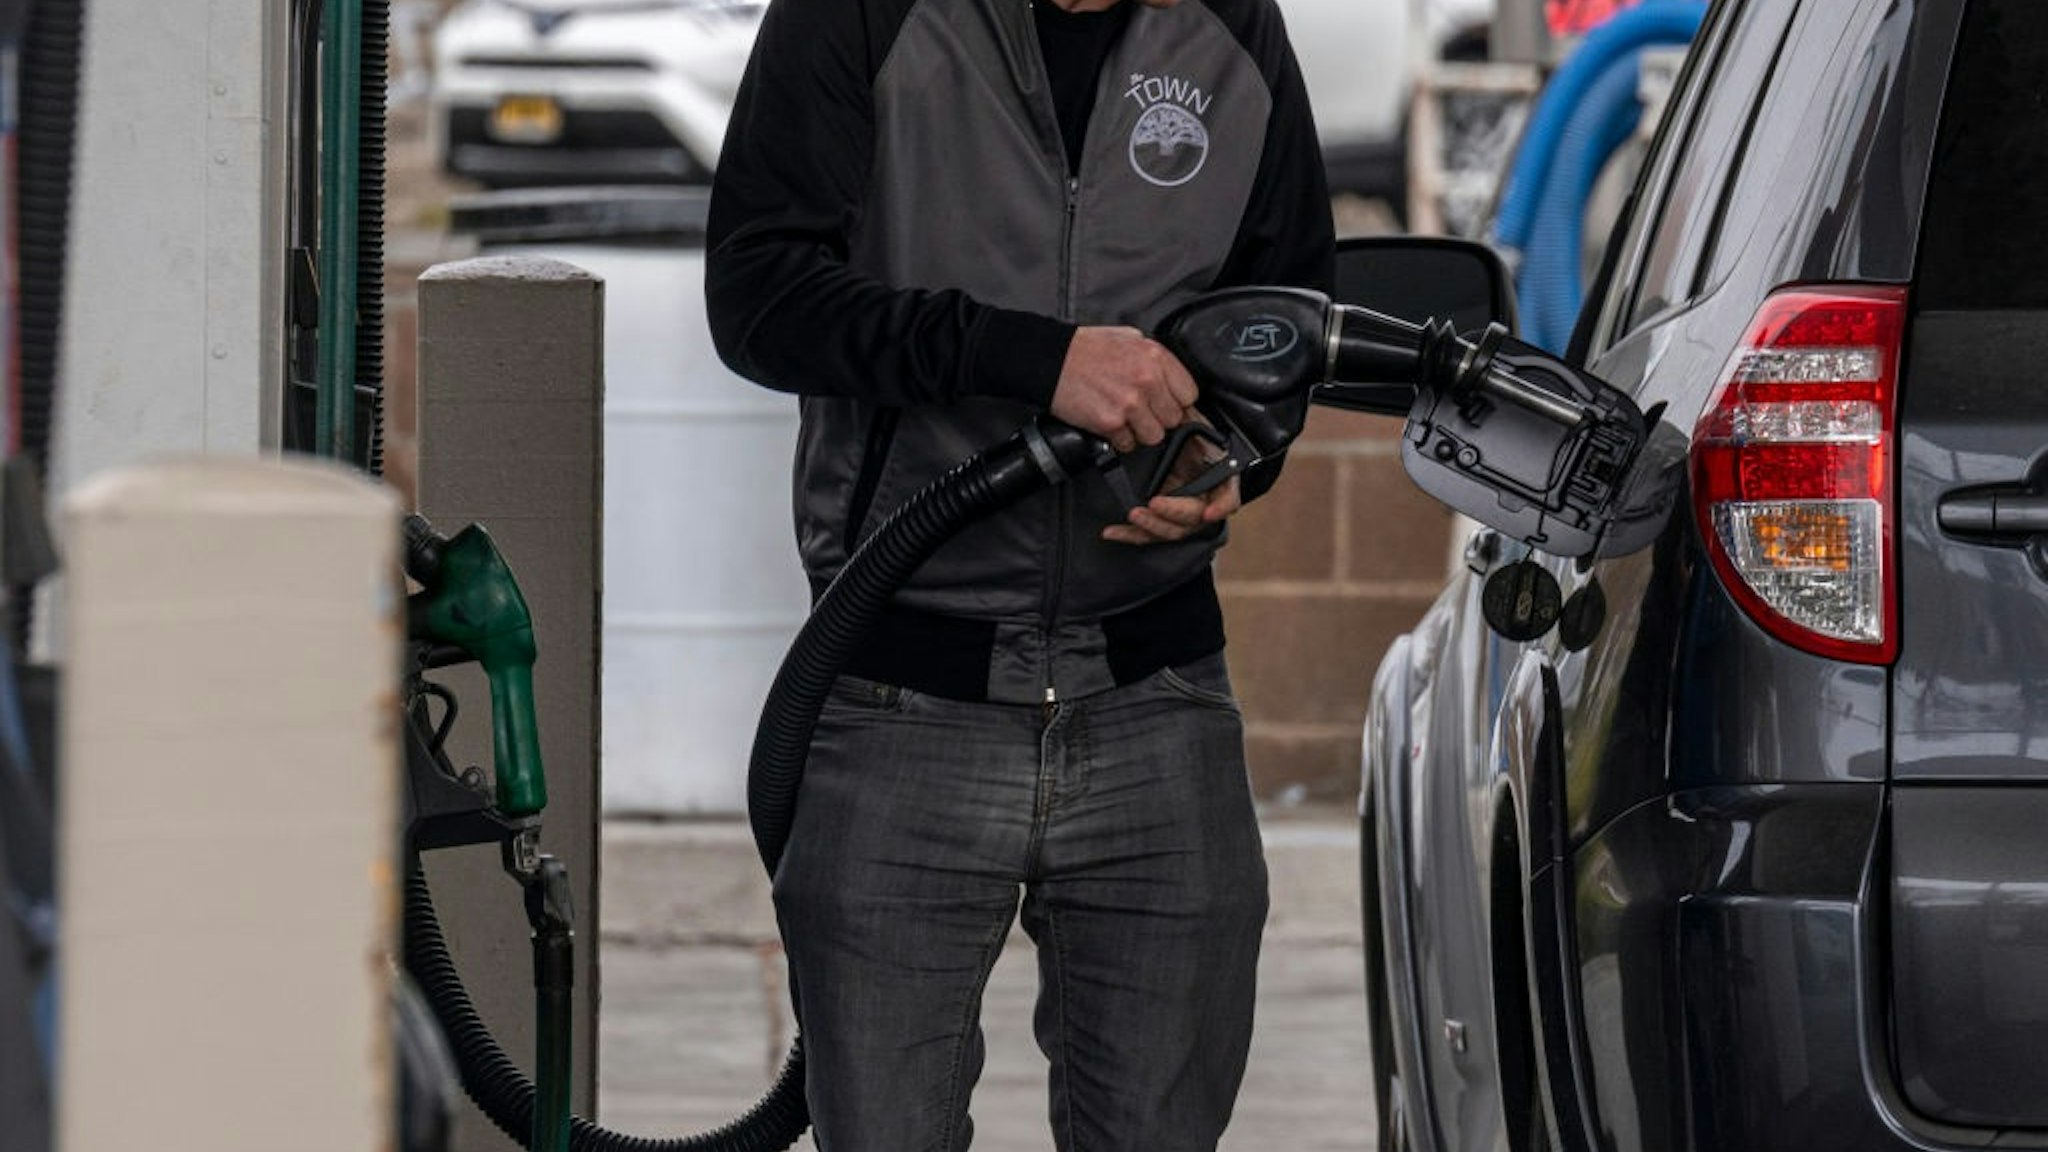 A driver fuels a vehicle a gas station in Richmond, California, U.S., on Thursday, March 24, 2022.